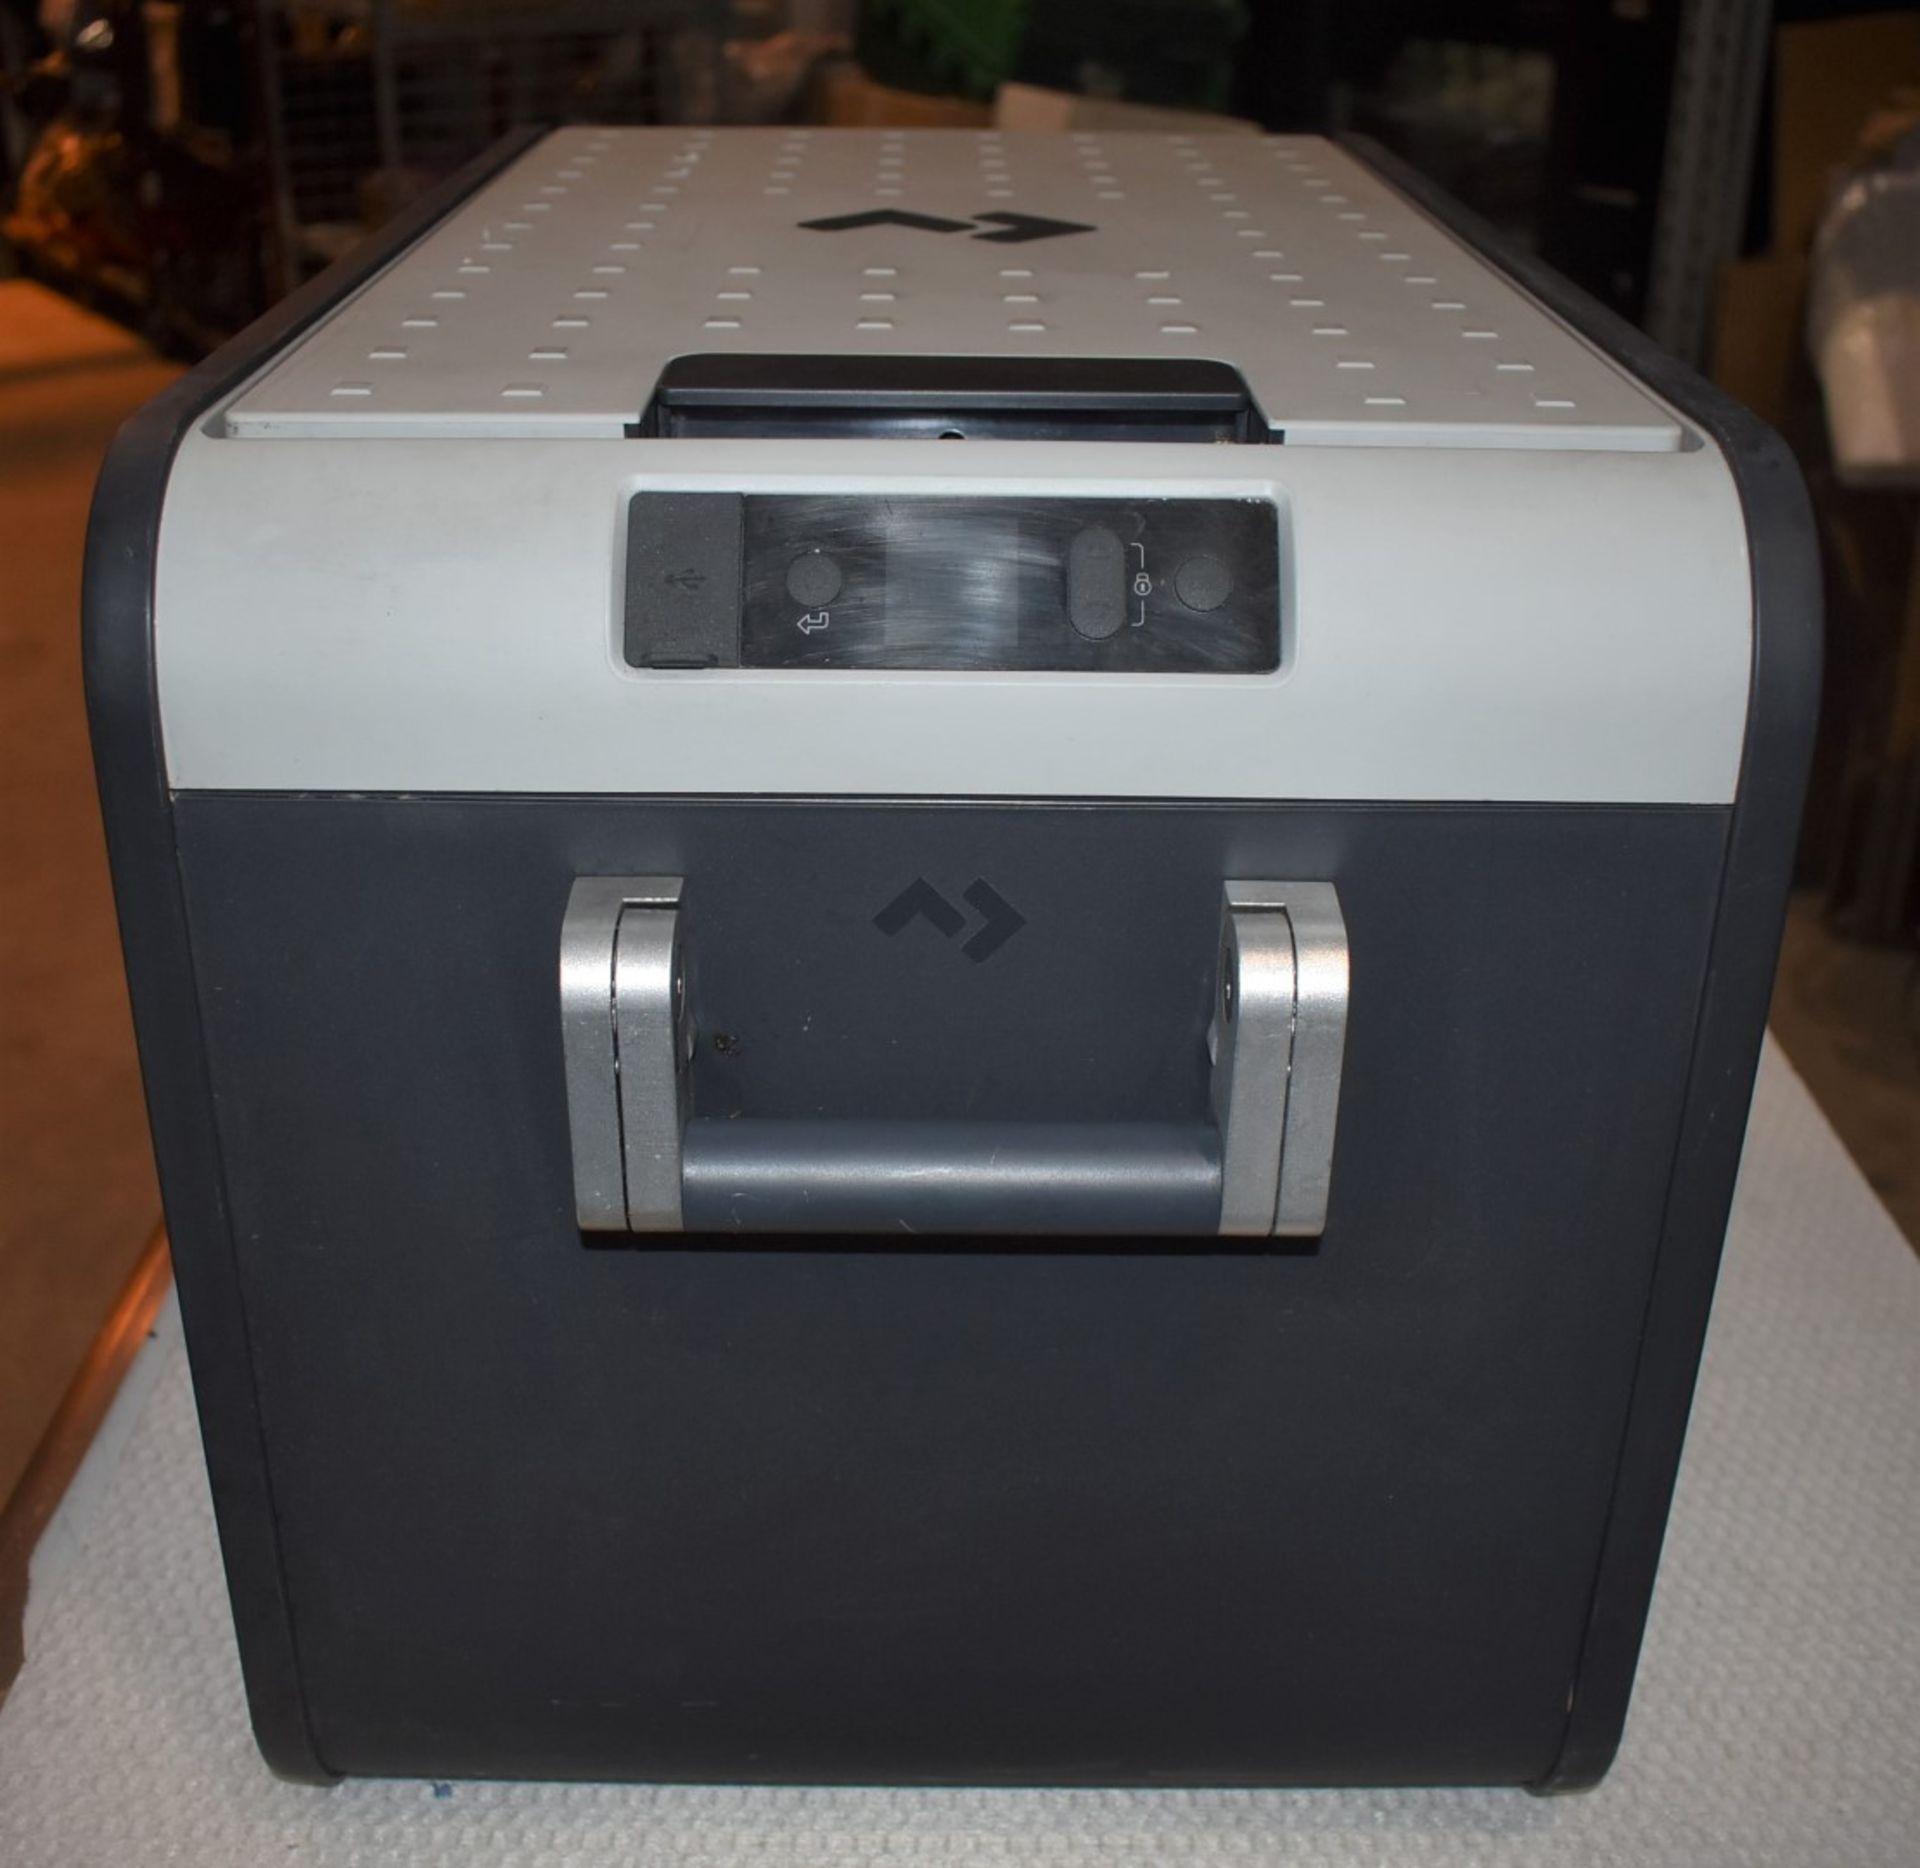 1 x Dometic CFX3 35 Portable 32l Compressor Cooler and Freezer - Perfect For Cooling The BBQ Beers - - Image 5 of 9